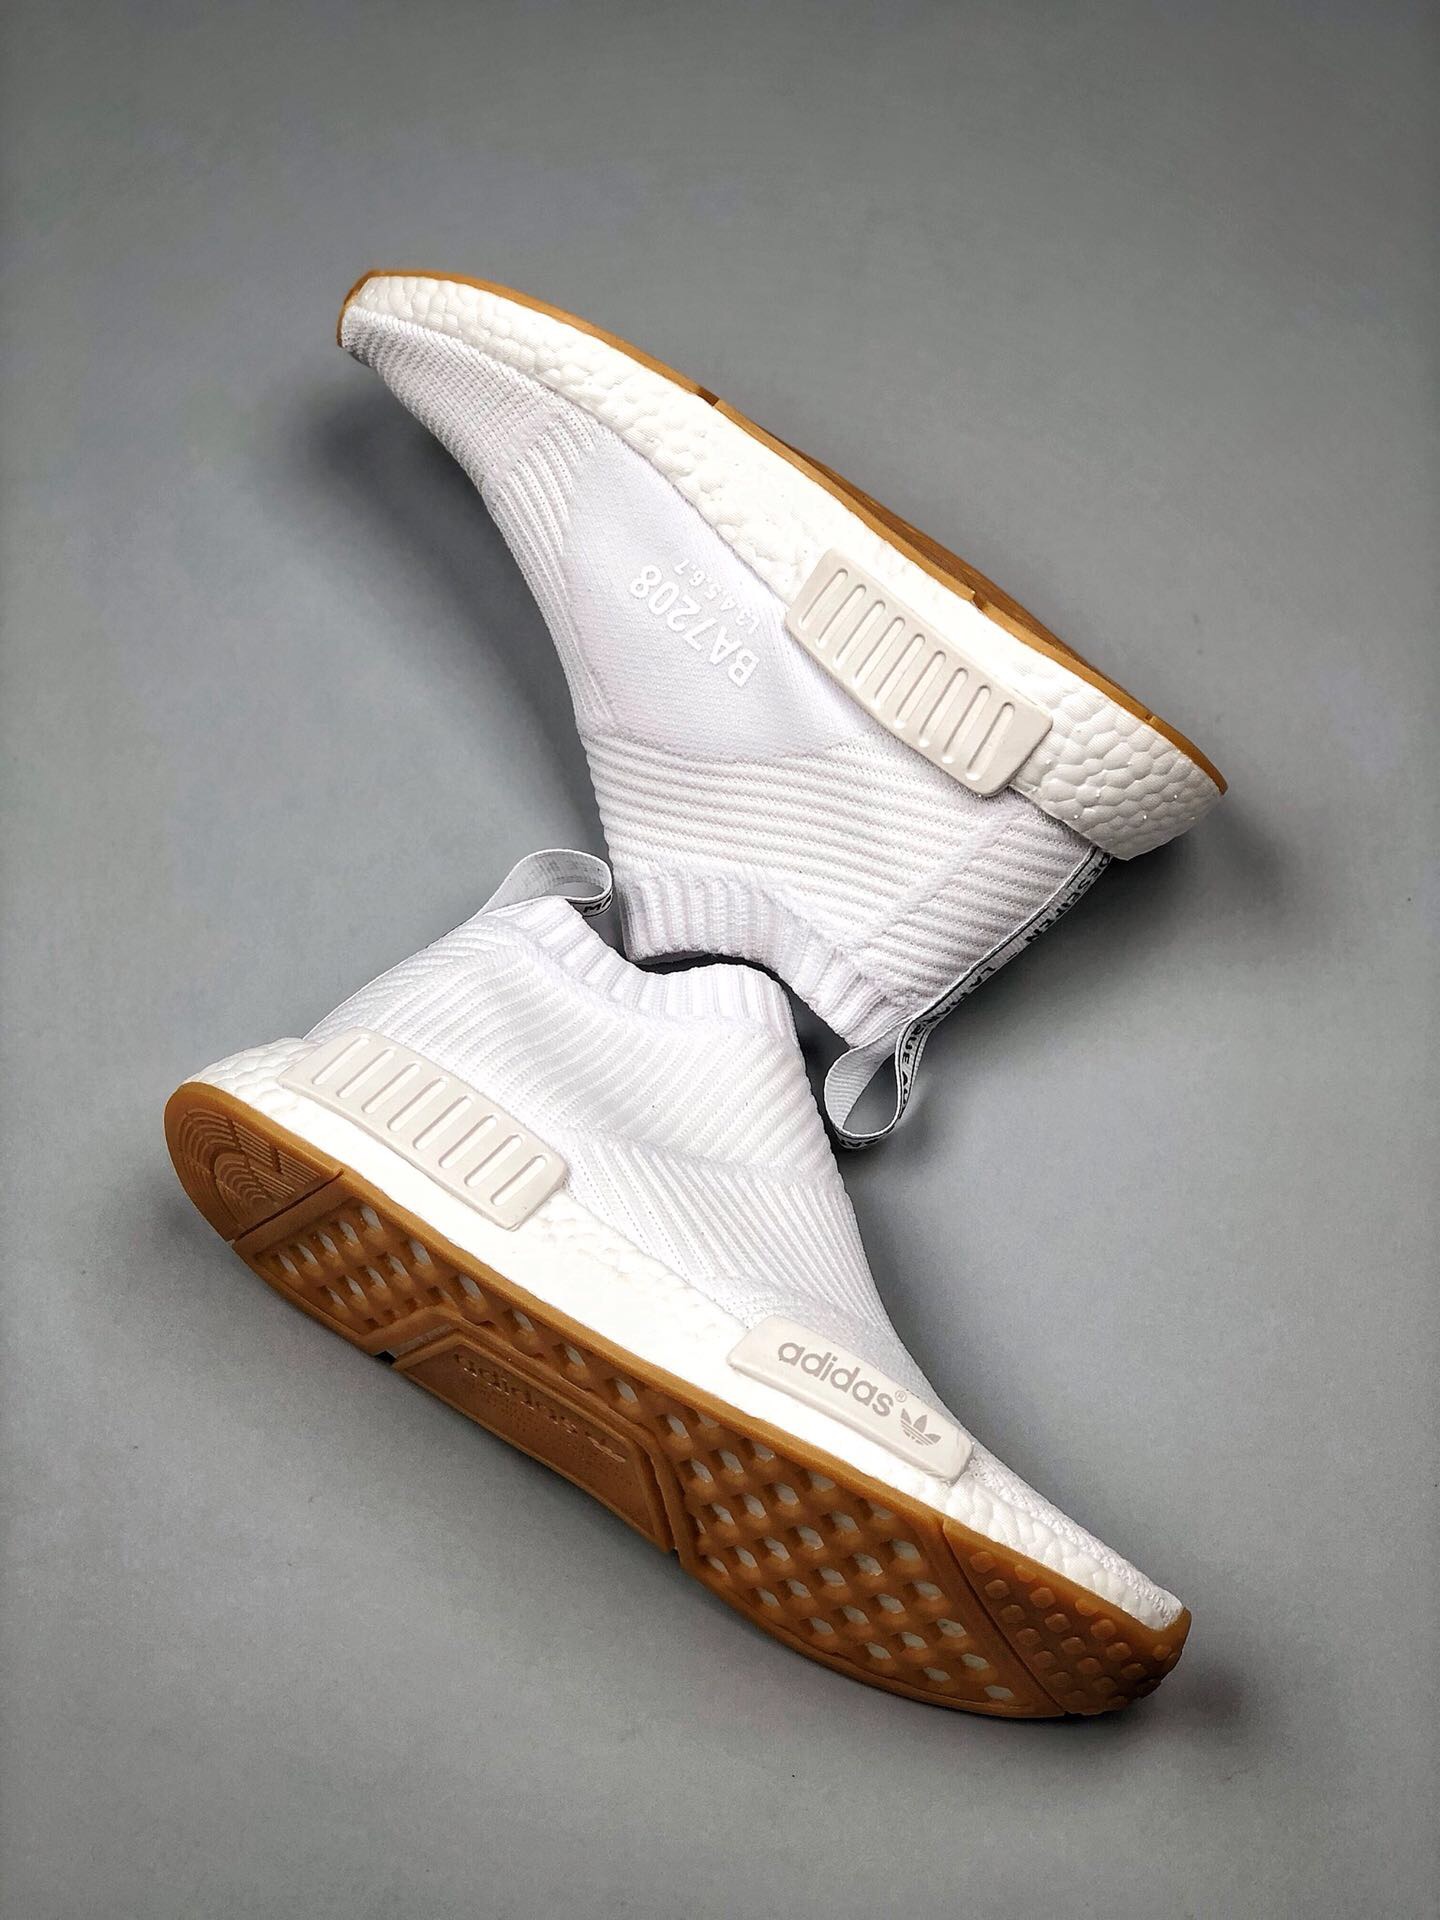 adidas NMD Gum For Sale – Sneaker Hello